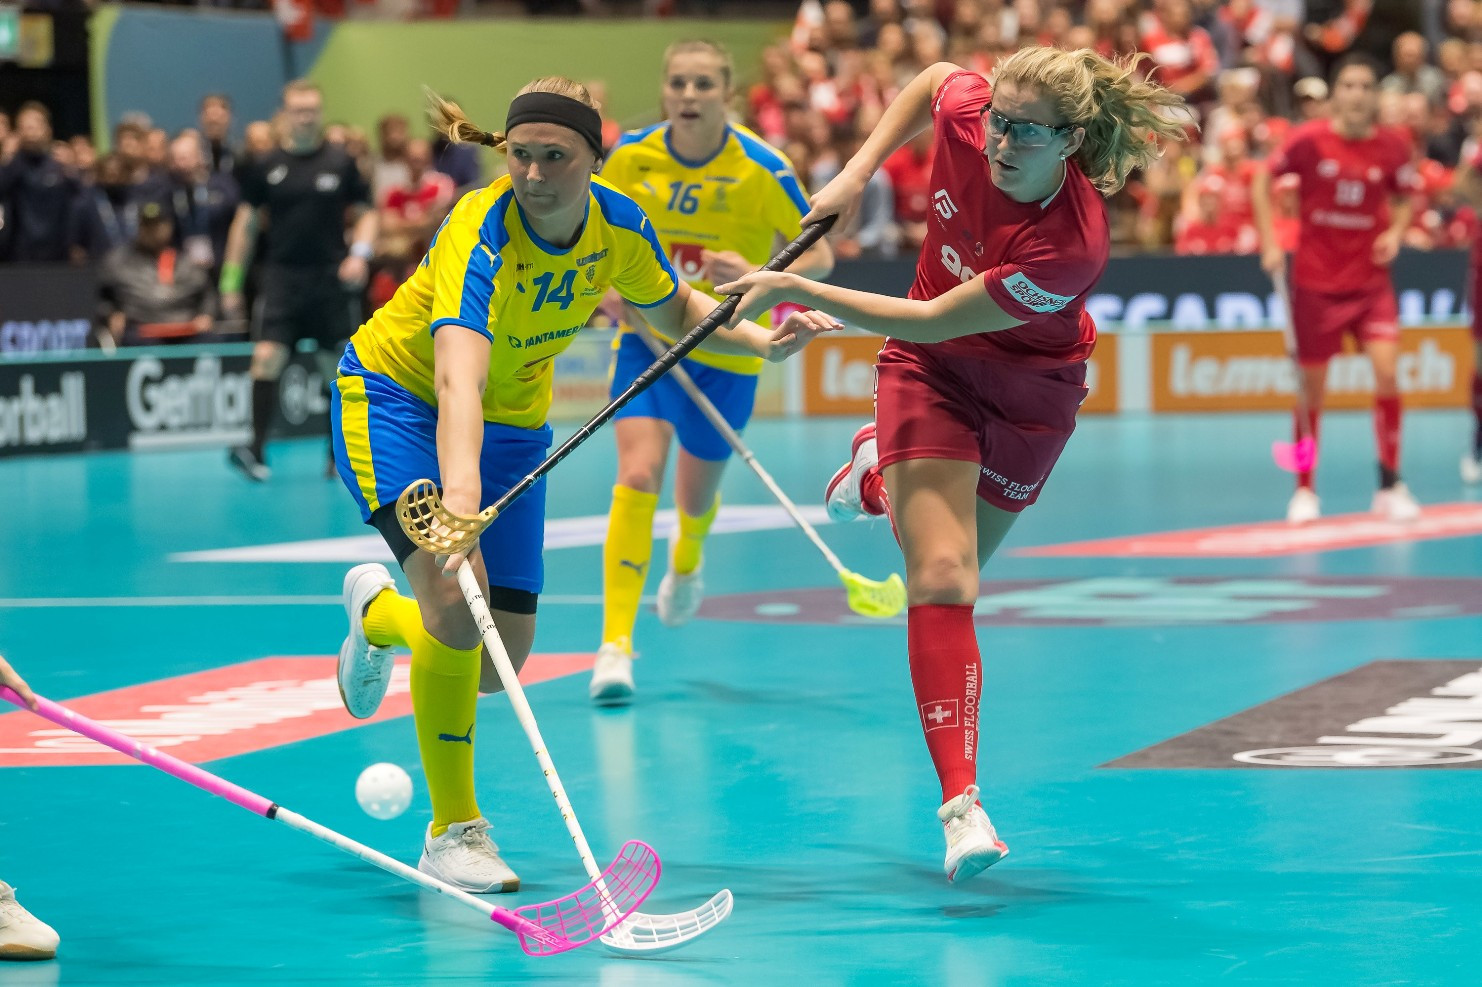 The International Floorball Federation's policies with regard to preventing sexual harassment and abuse within the sport are being reviewed by IFF information co-ordinator Mari Myllärinen ©IFF